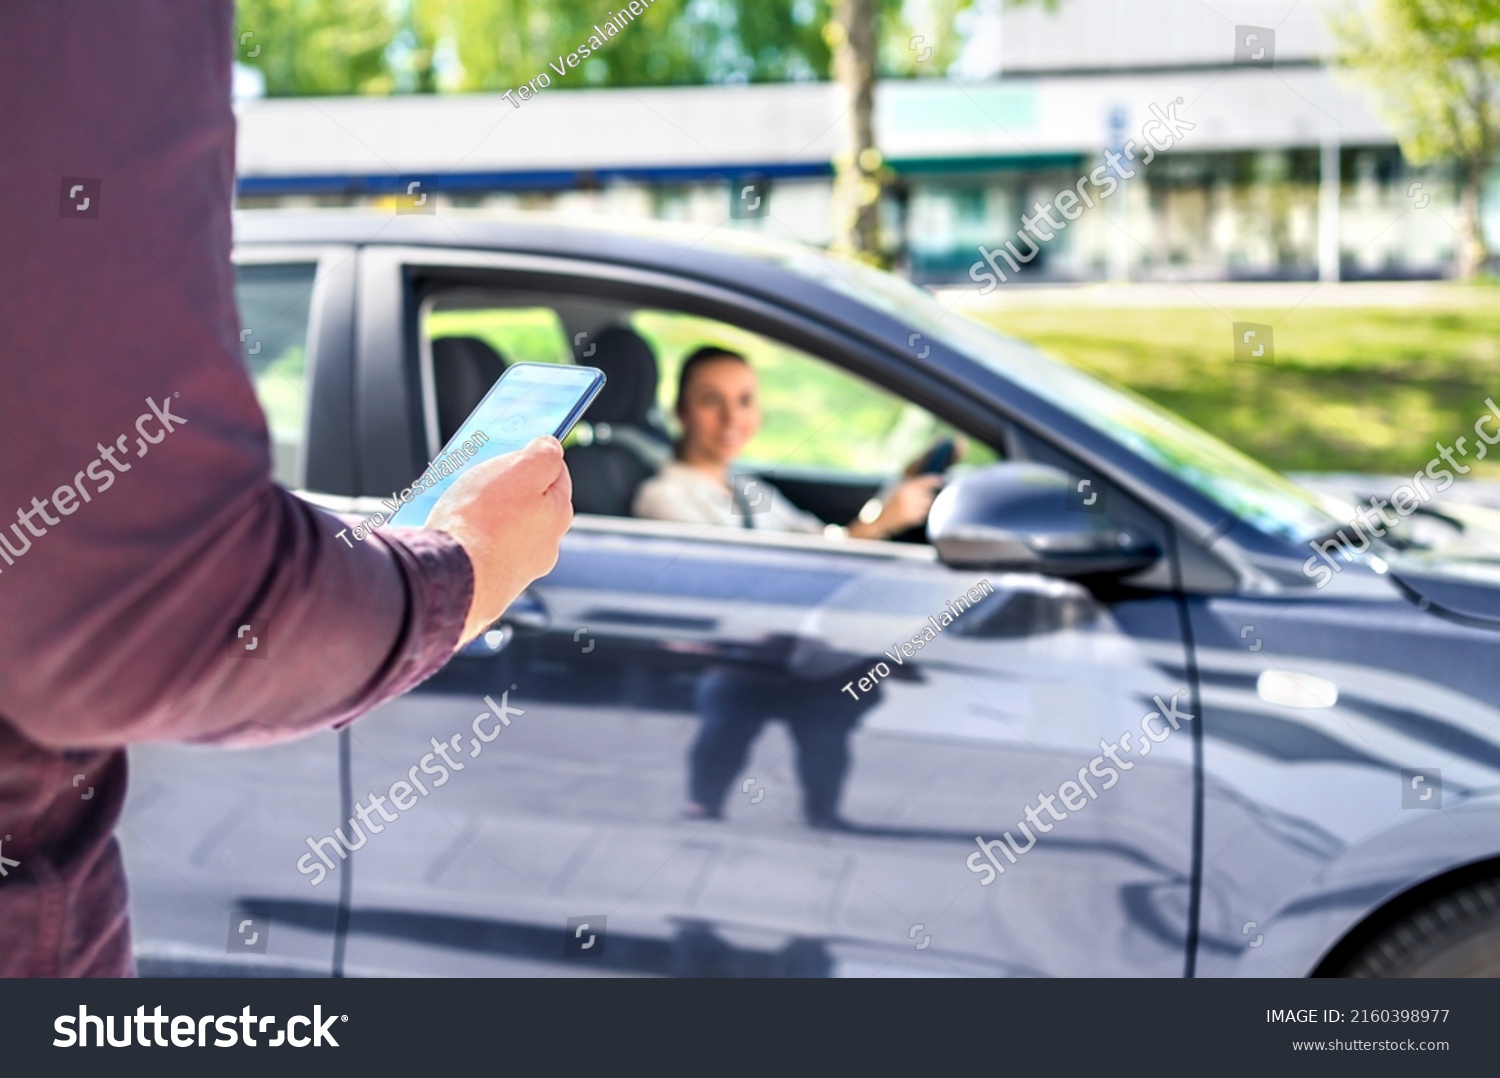 Taxi phone app for cab or car ride share service. Customer waiting driver to pick up on city street. Man holding smartphone. Mobile and online booking for rideshare transportation with cellphone. #2160398977